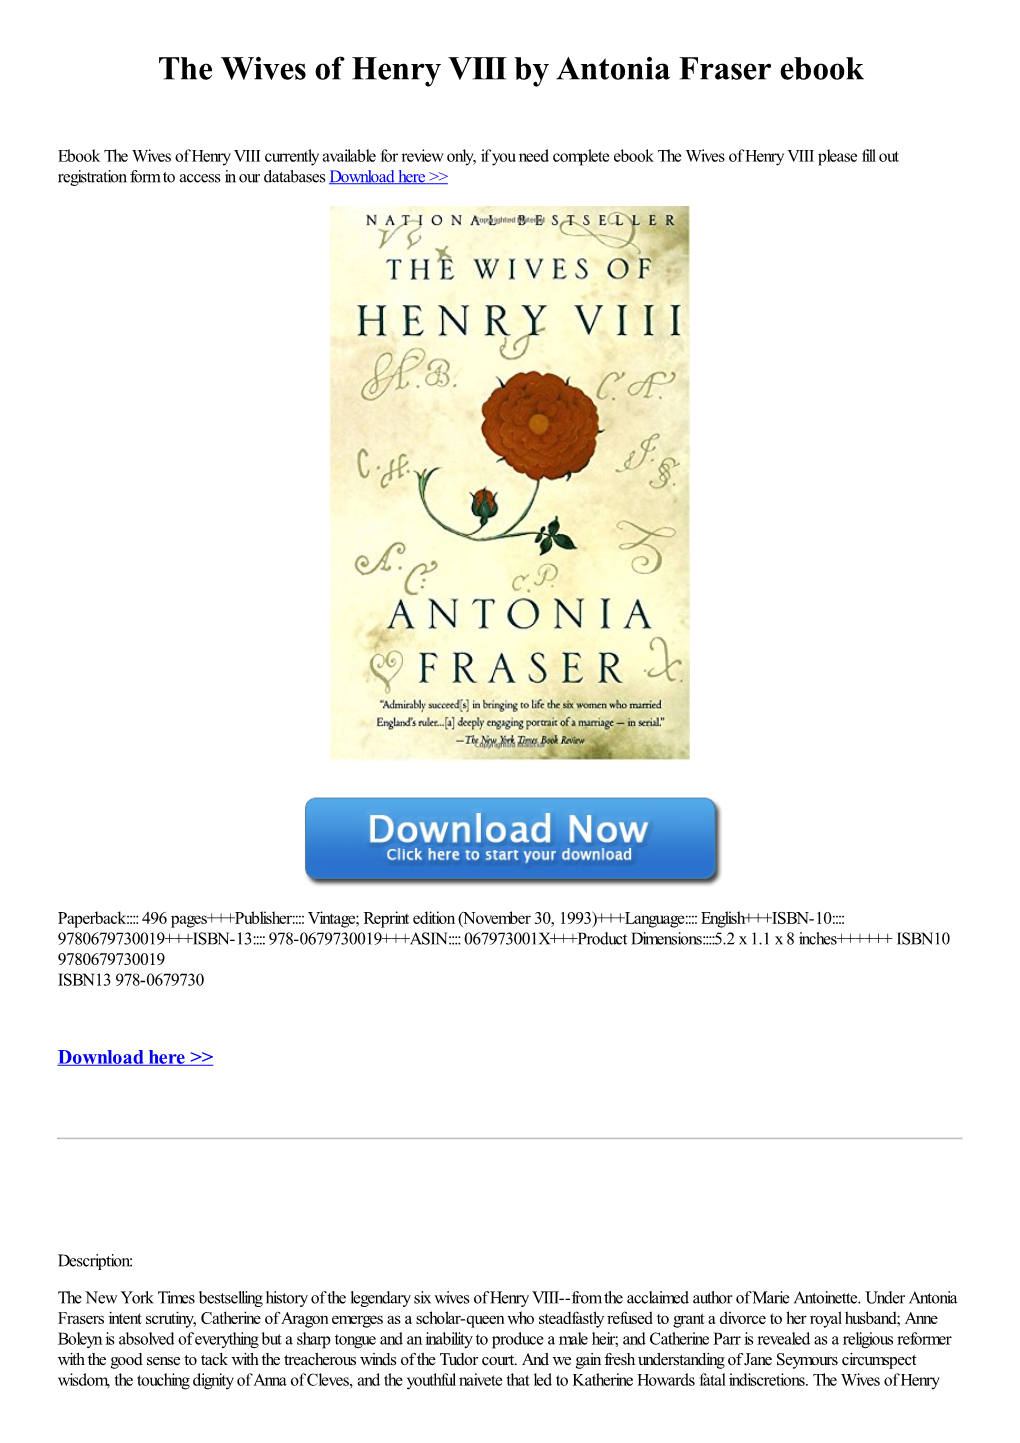 The Wives of Henry VIII by Antonia Fraser Ebook